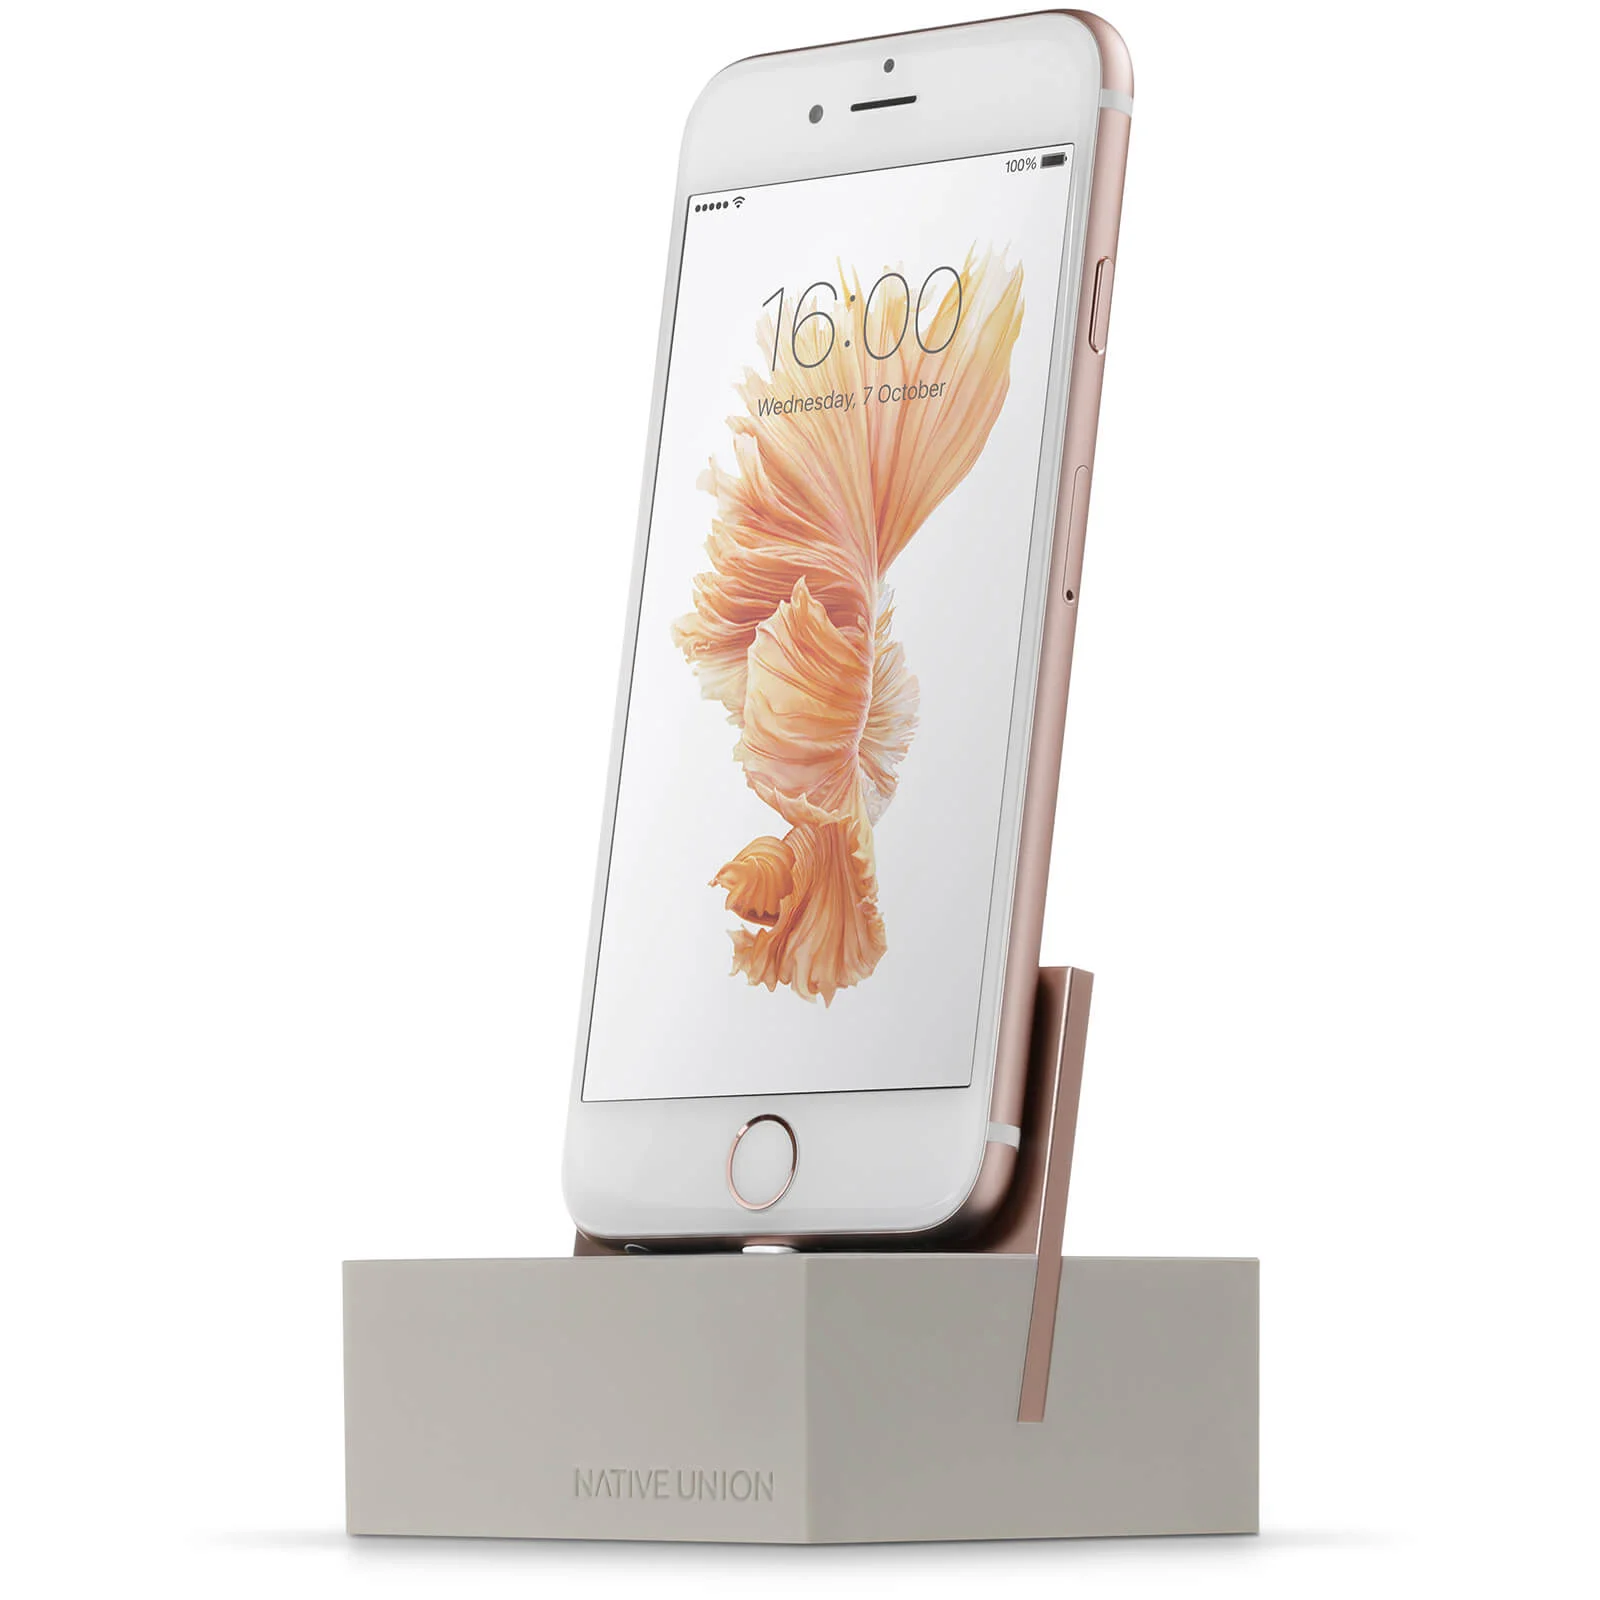 Native Union Dock For iPhone with 1.2m Cable - Stone Image 1